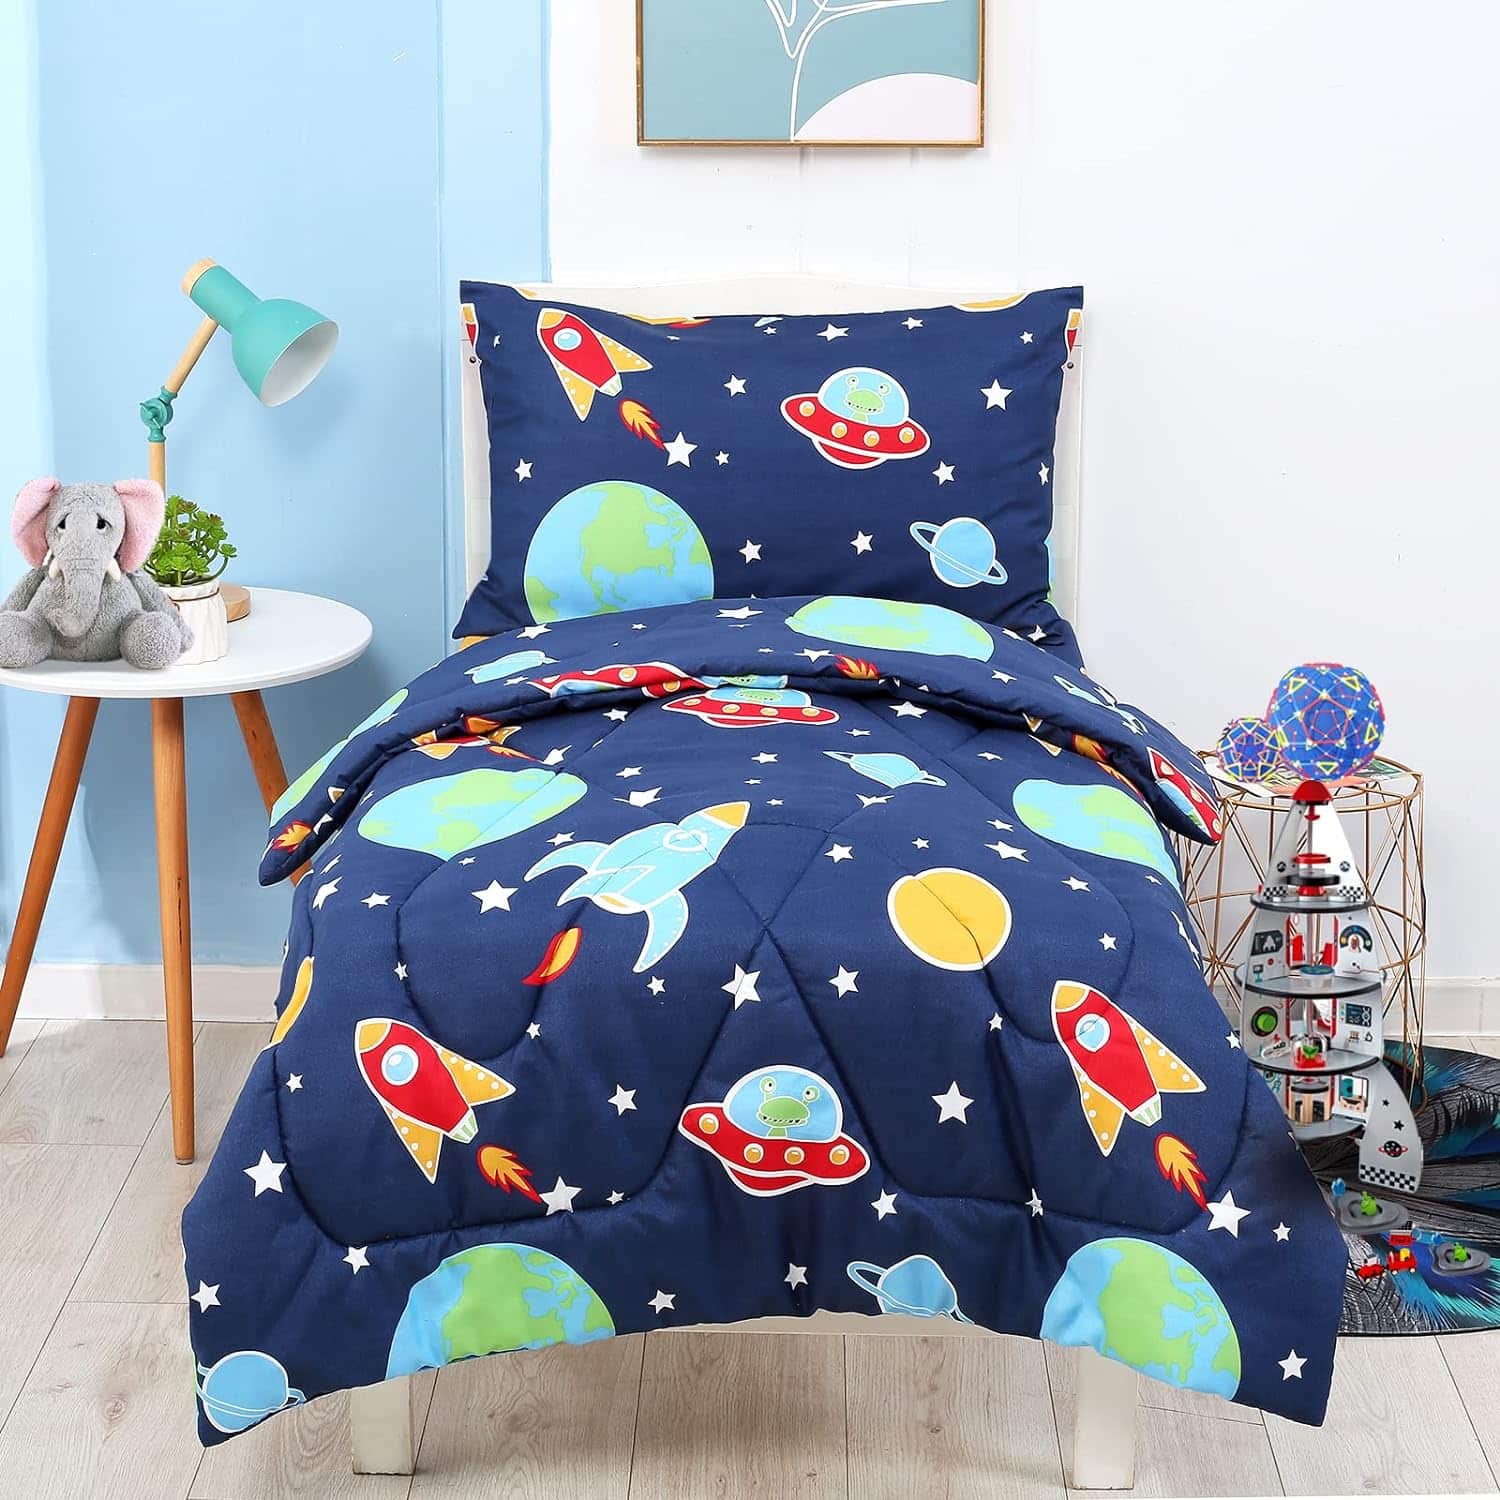 Cloele 3 Piece Toddler Bedding Set – The Perfect Space-Themed Bedding for Your Little Astronaut